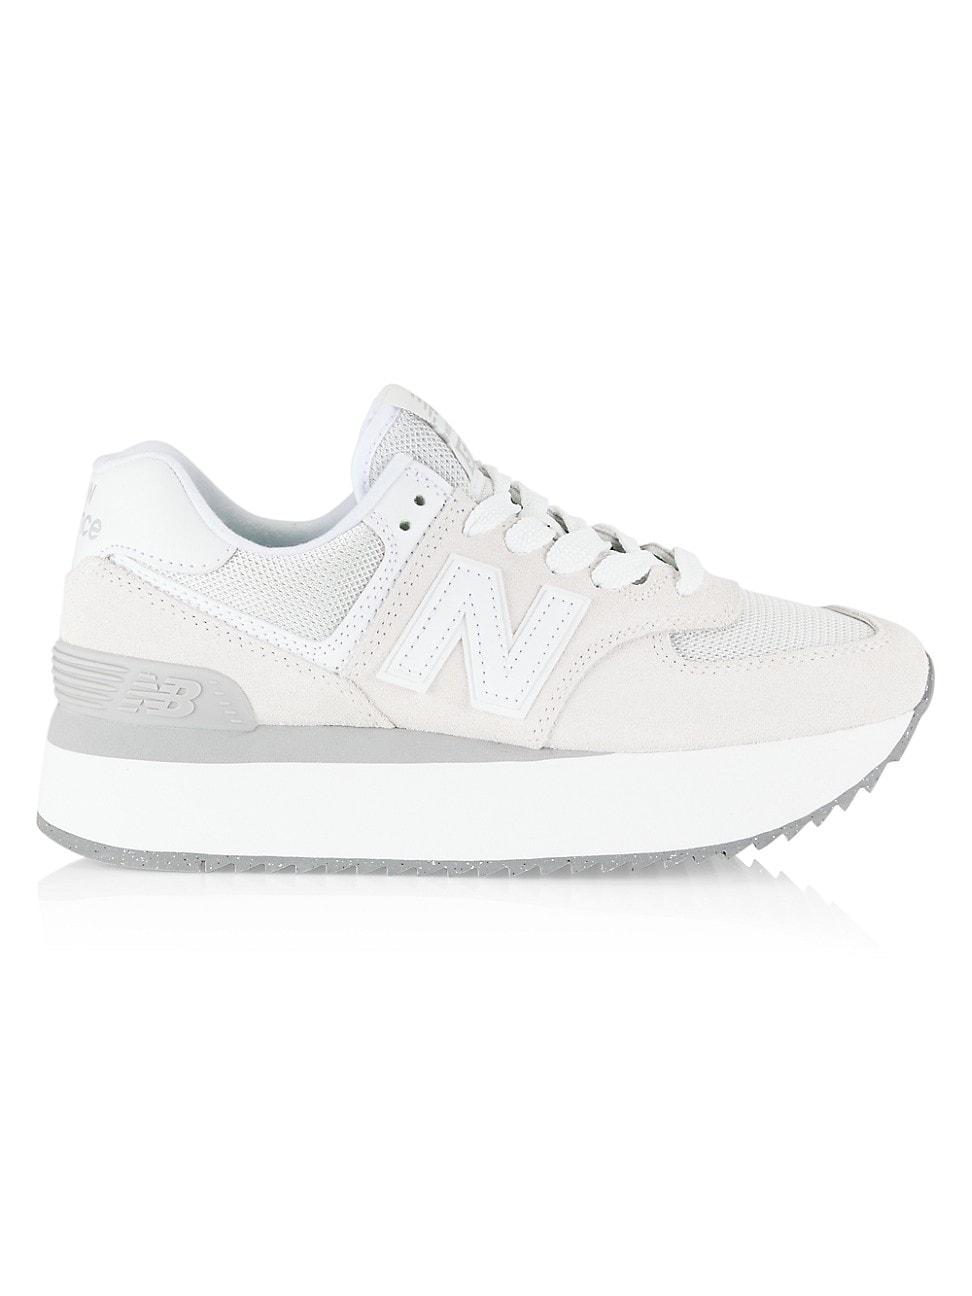 New Balance 574+ Suede & Leather Platform Sneakers in White | Lyst